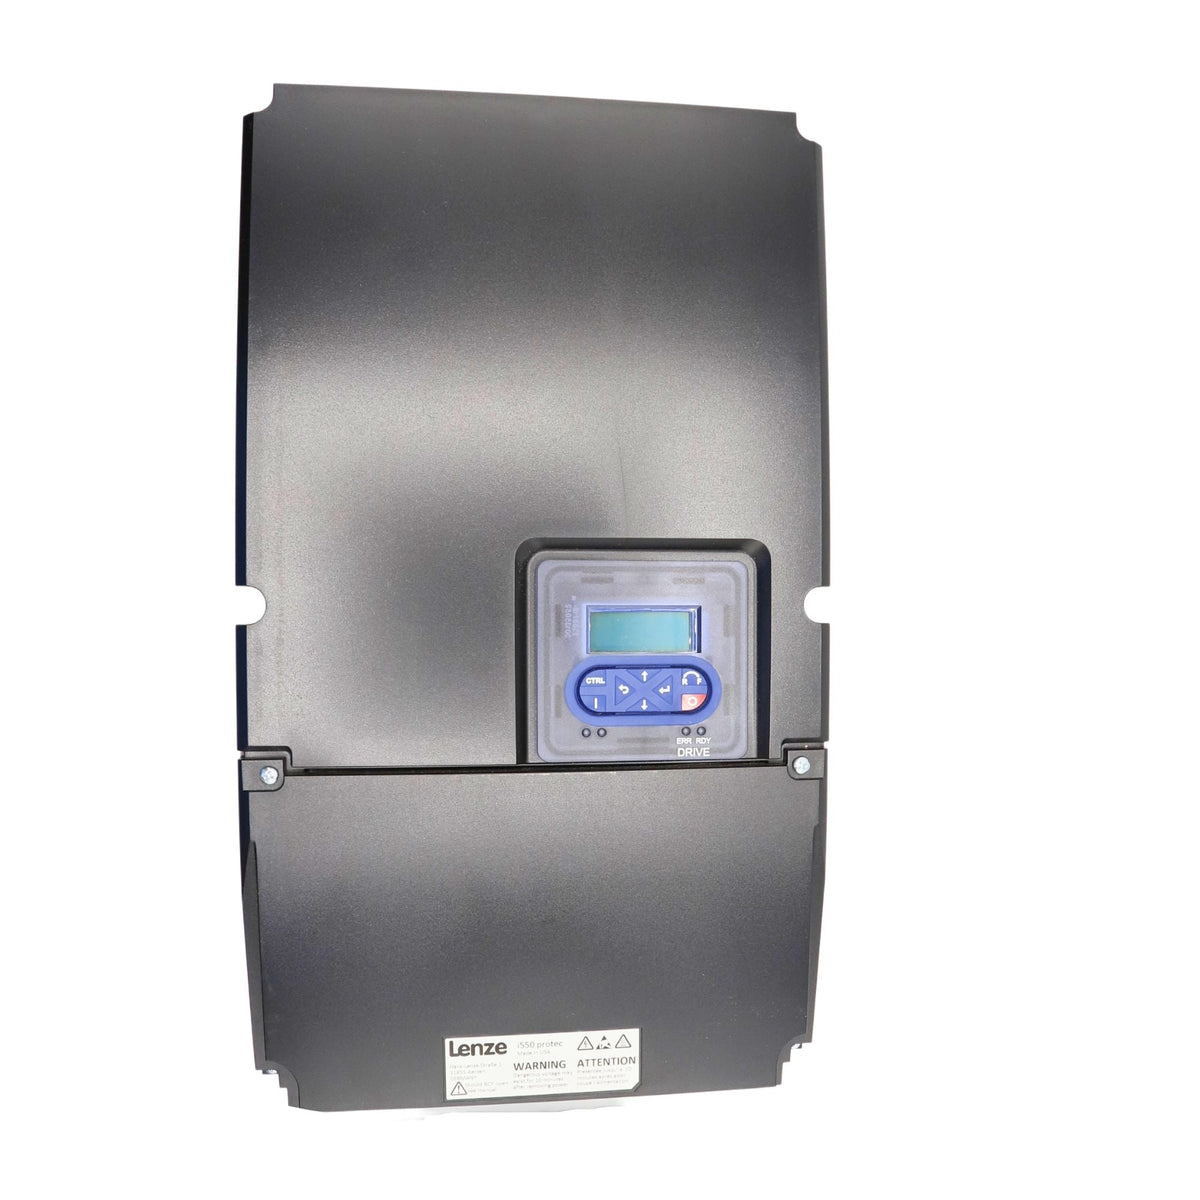  Lenze | I550 Protec 20hp Wall Mount, Nema 4x rated, Keypad, Incremental encoder (HTL) via two digital inputs, 5digital inputs, 2 analog inputs, 1 digital output 1 analog Output, 1 relay | I55AP315F00711K00S - front view